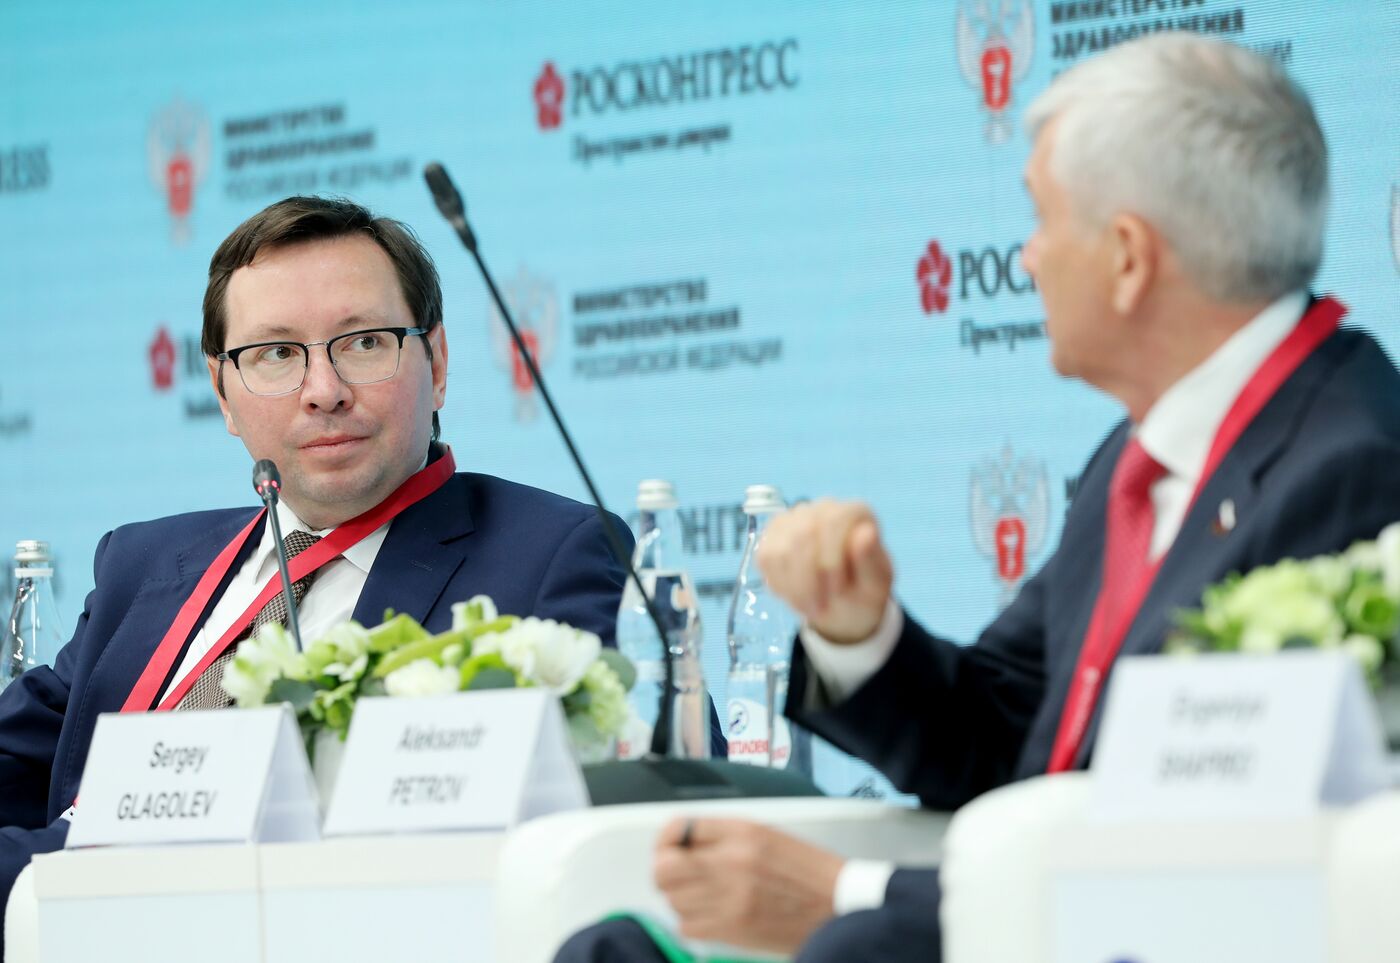 SPIEF-2023. The Regulatory Response to Economic Sanctions: New Mechanisms Vital for Future Development of the Pharmaceutical Industry